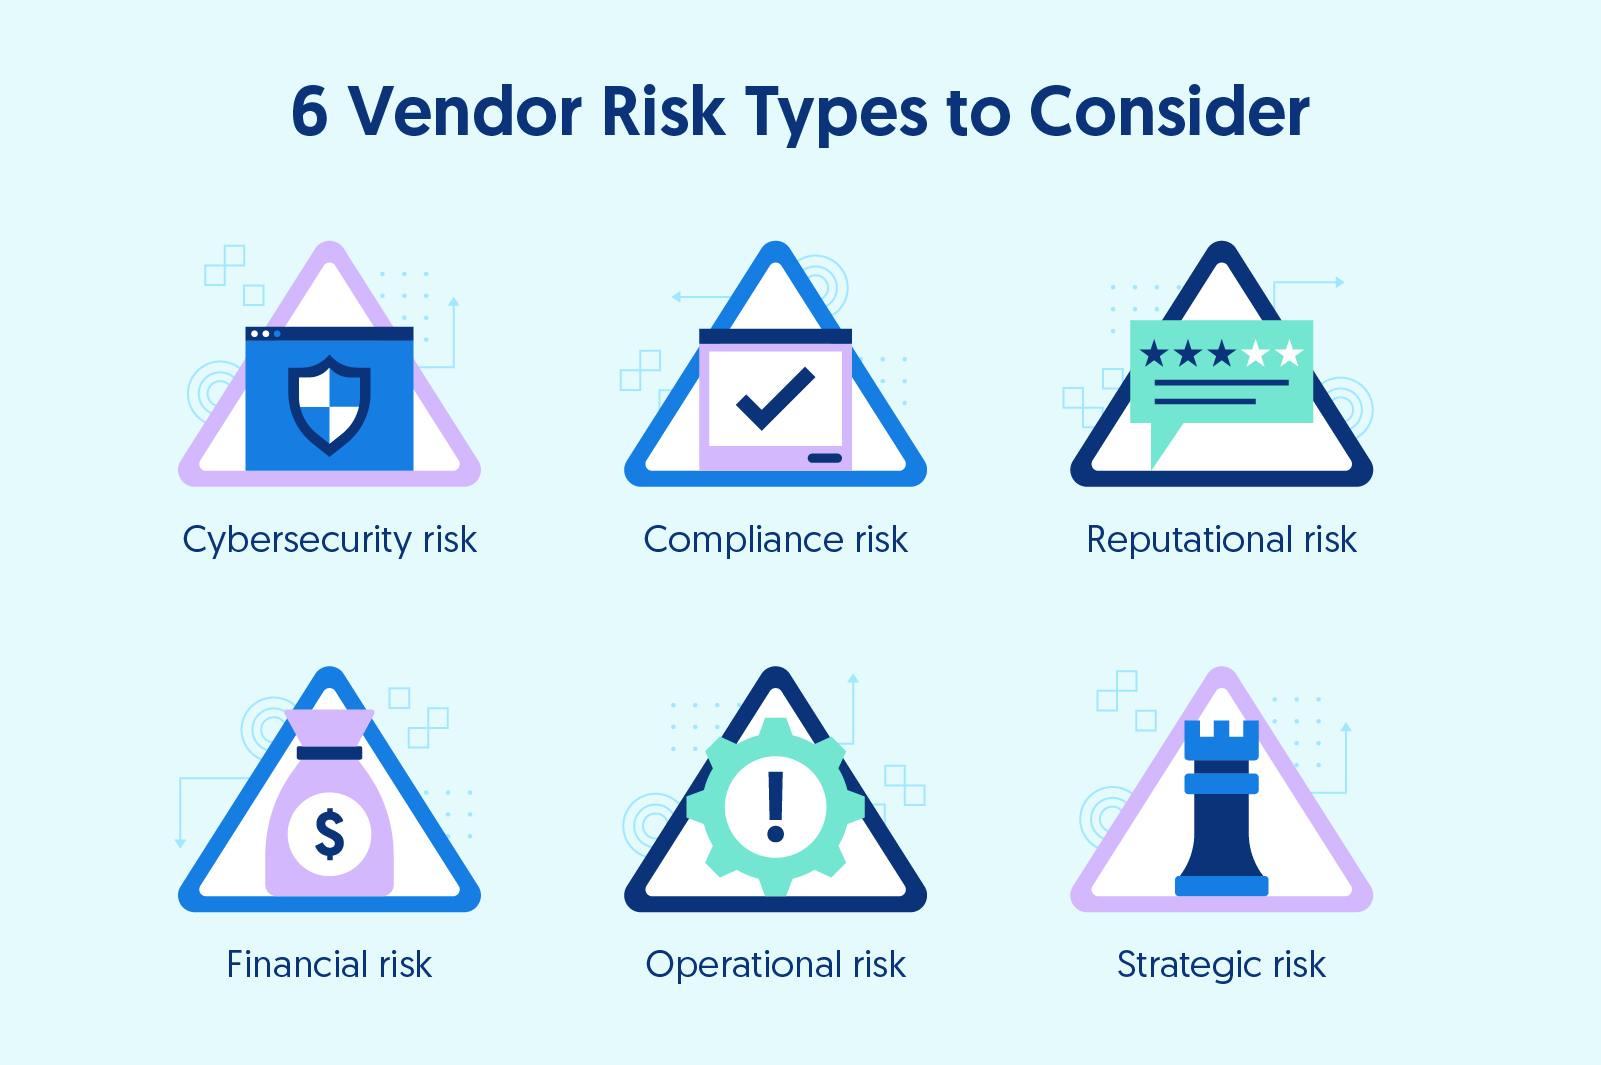 6 types of vendor risks including cybersecurity and operational risk